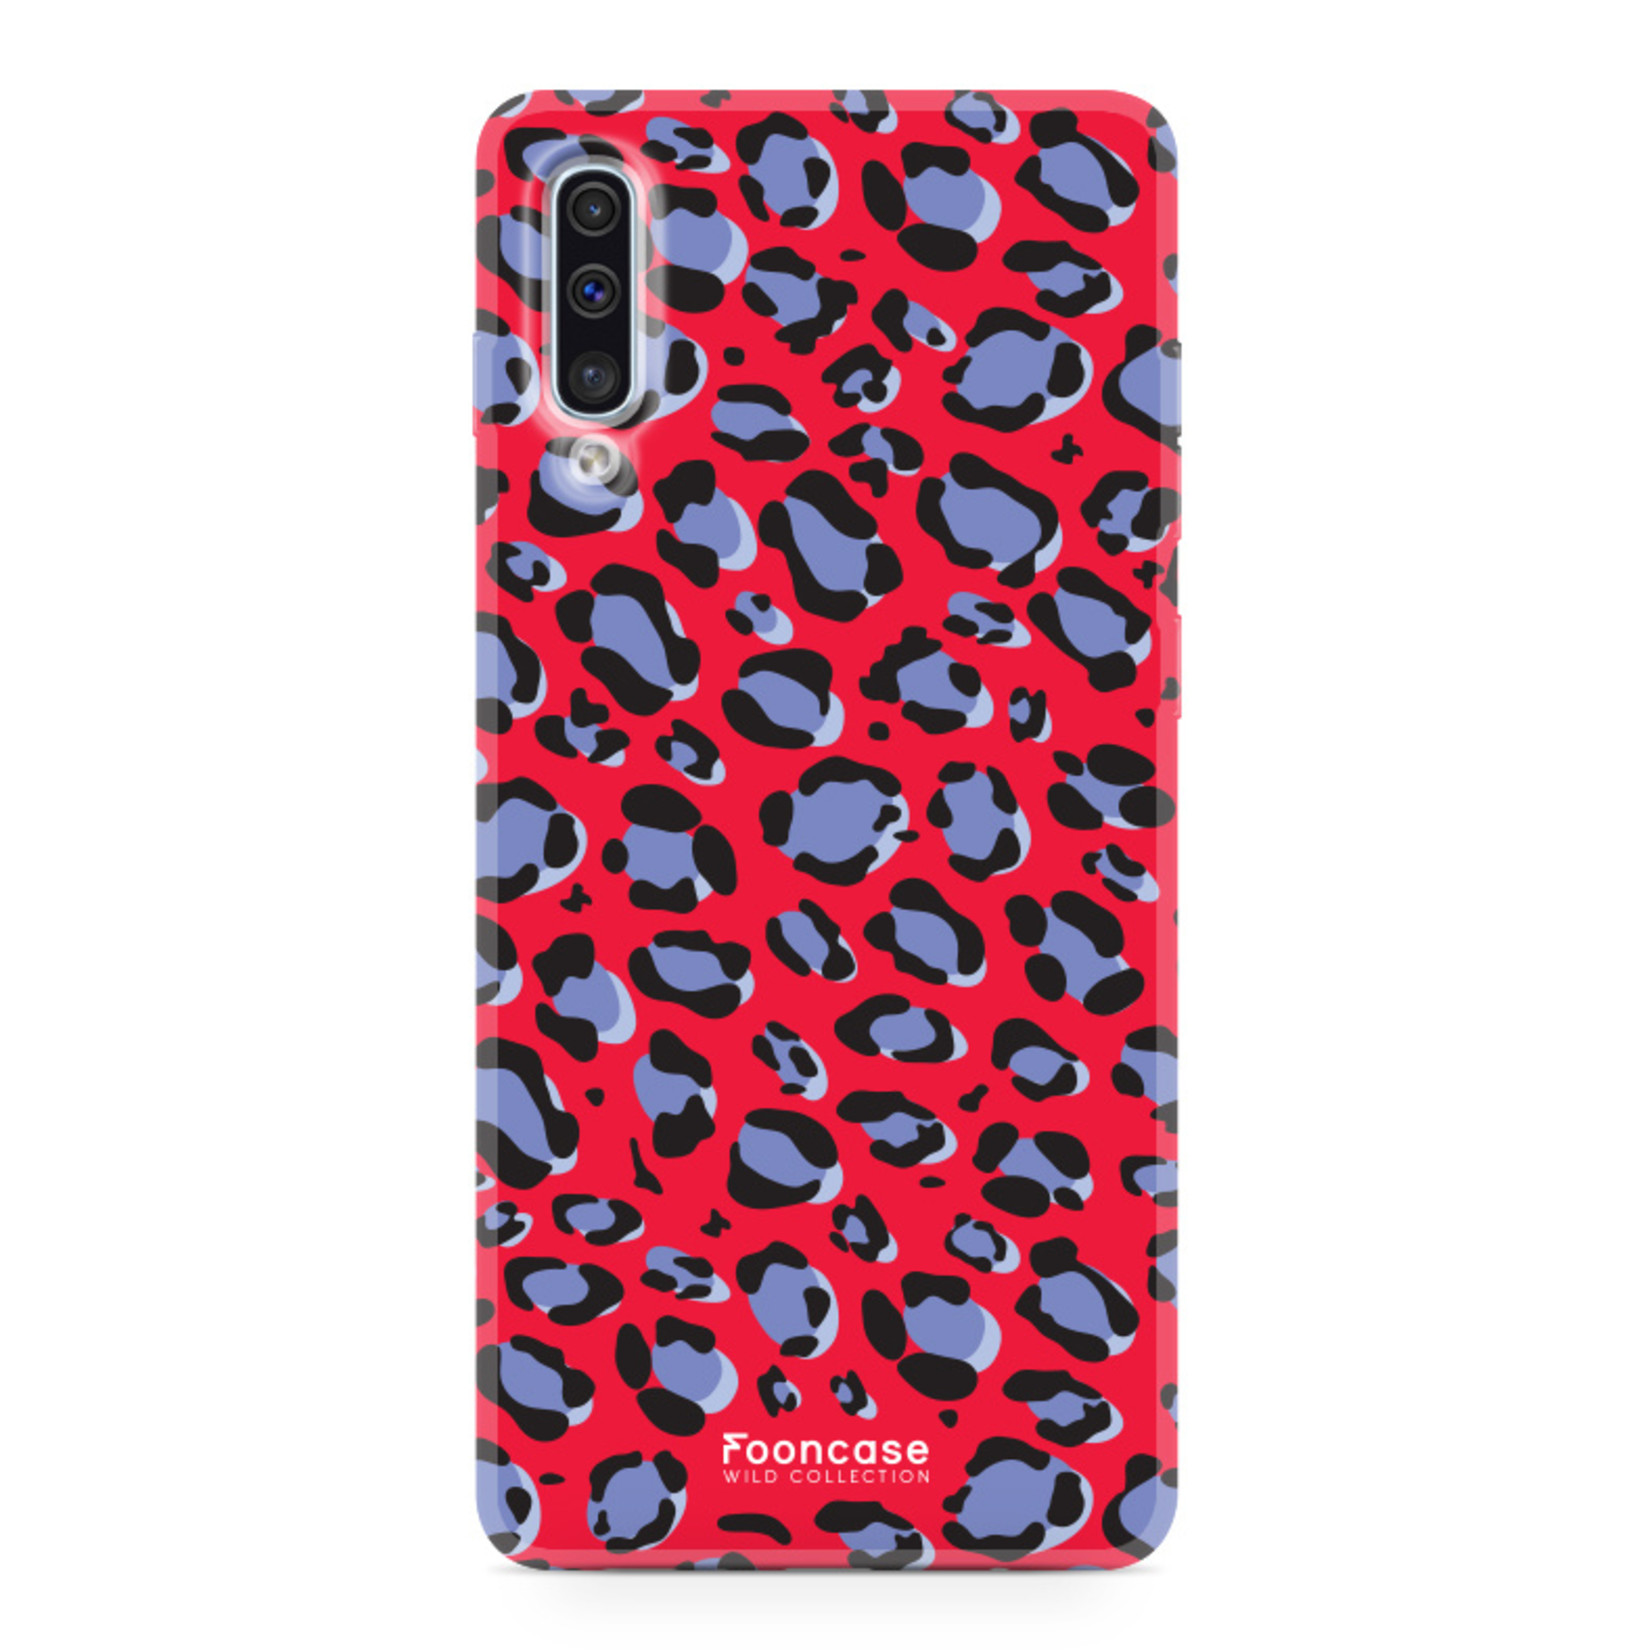 FOONCASE Samsung Galaxy A50 hoesje TPU Soft Case - Back Cover - Luipaard / Leopard print / Rood